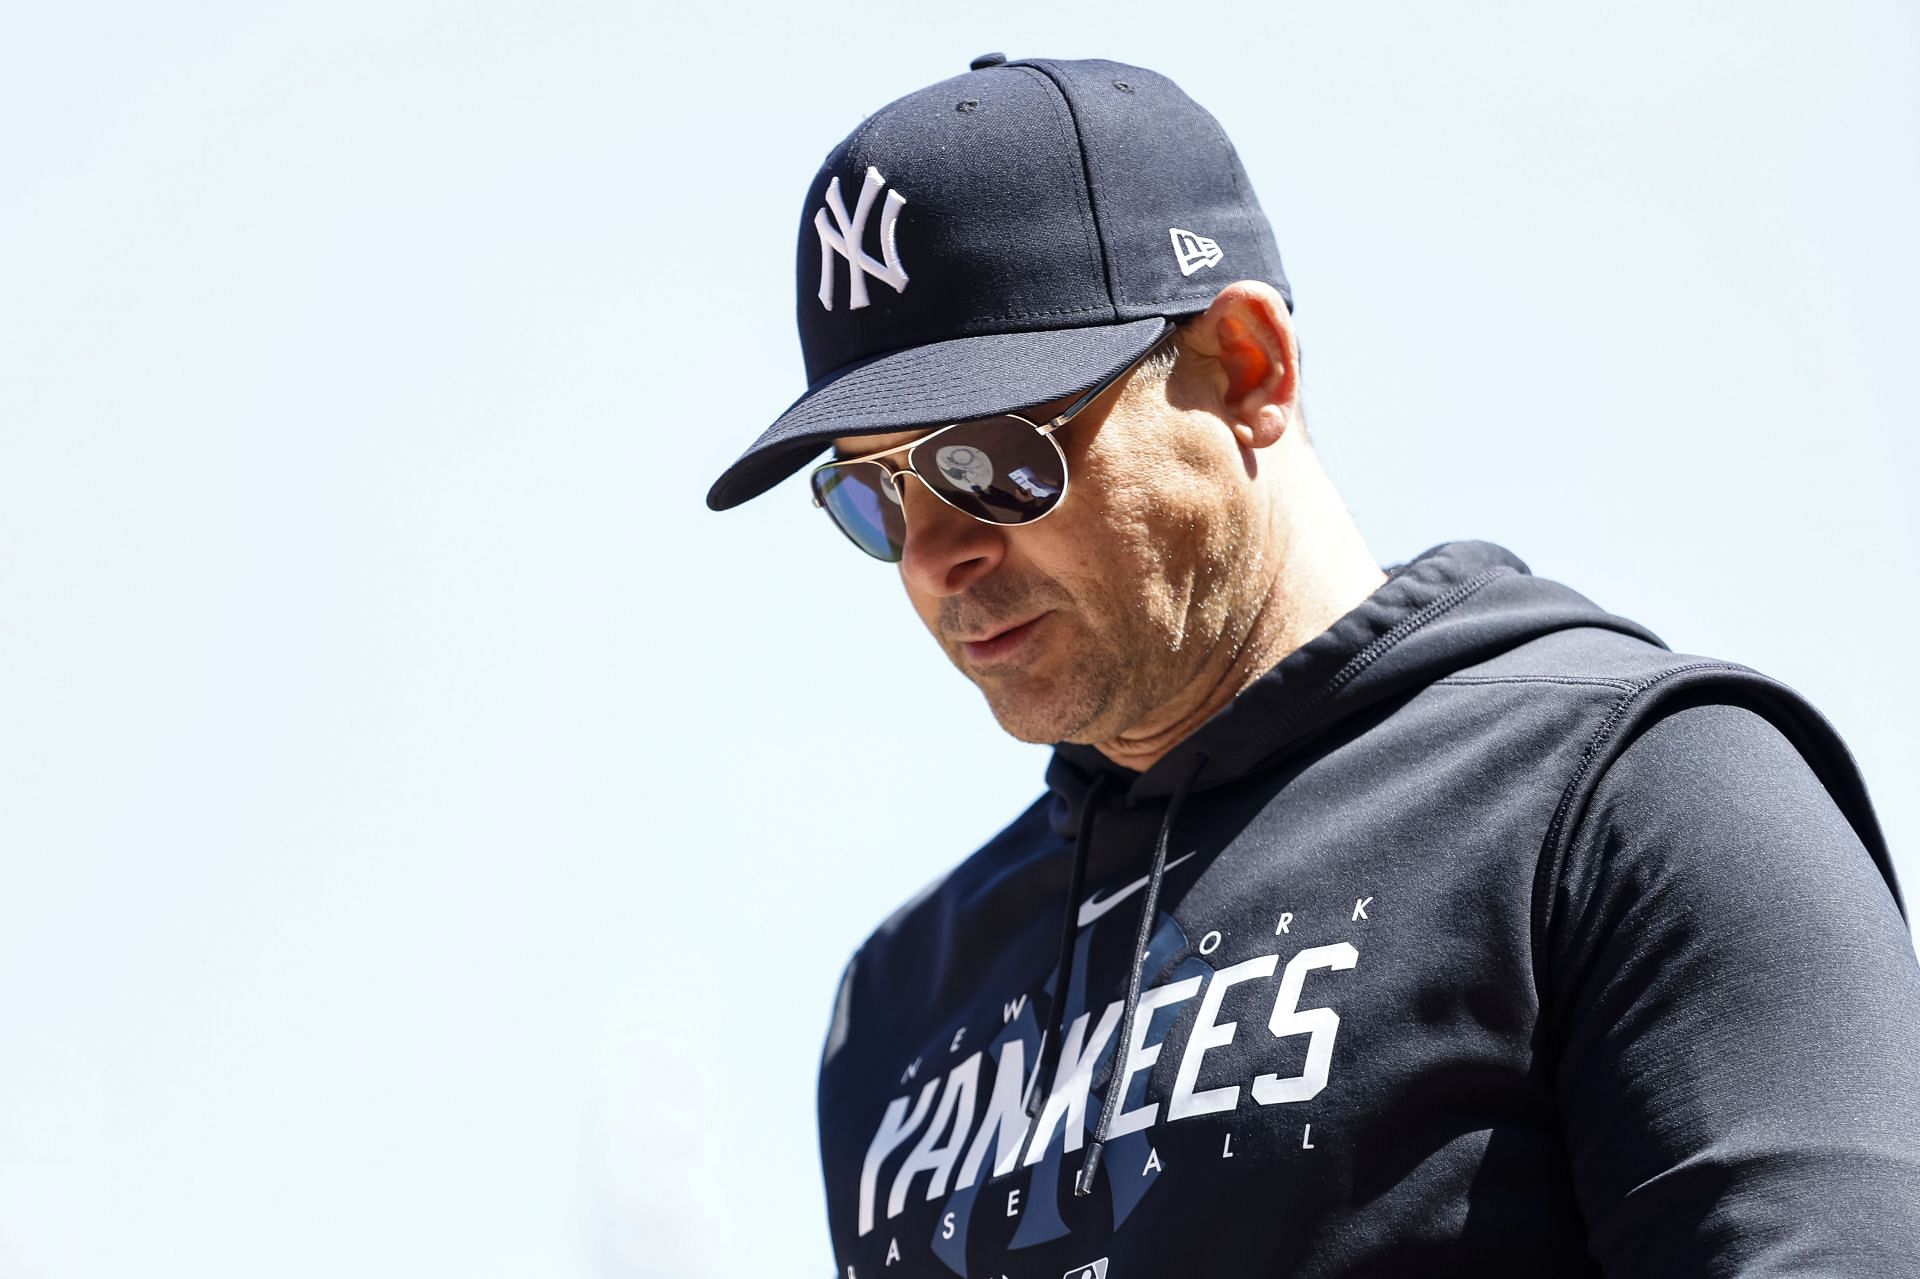 Aaron Boone on future as Yankees manager: 'I don't worry about it